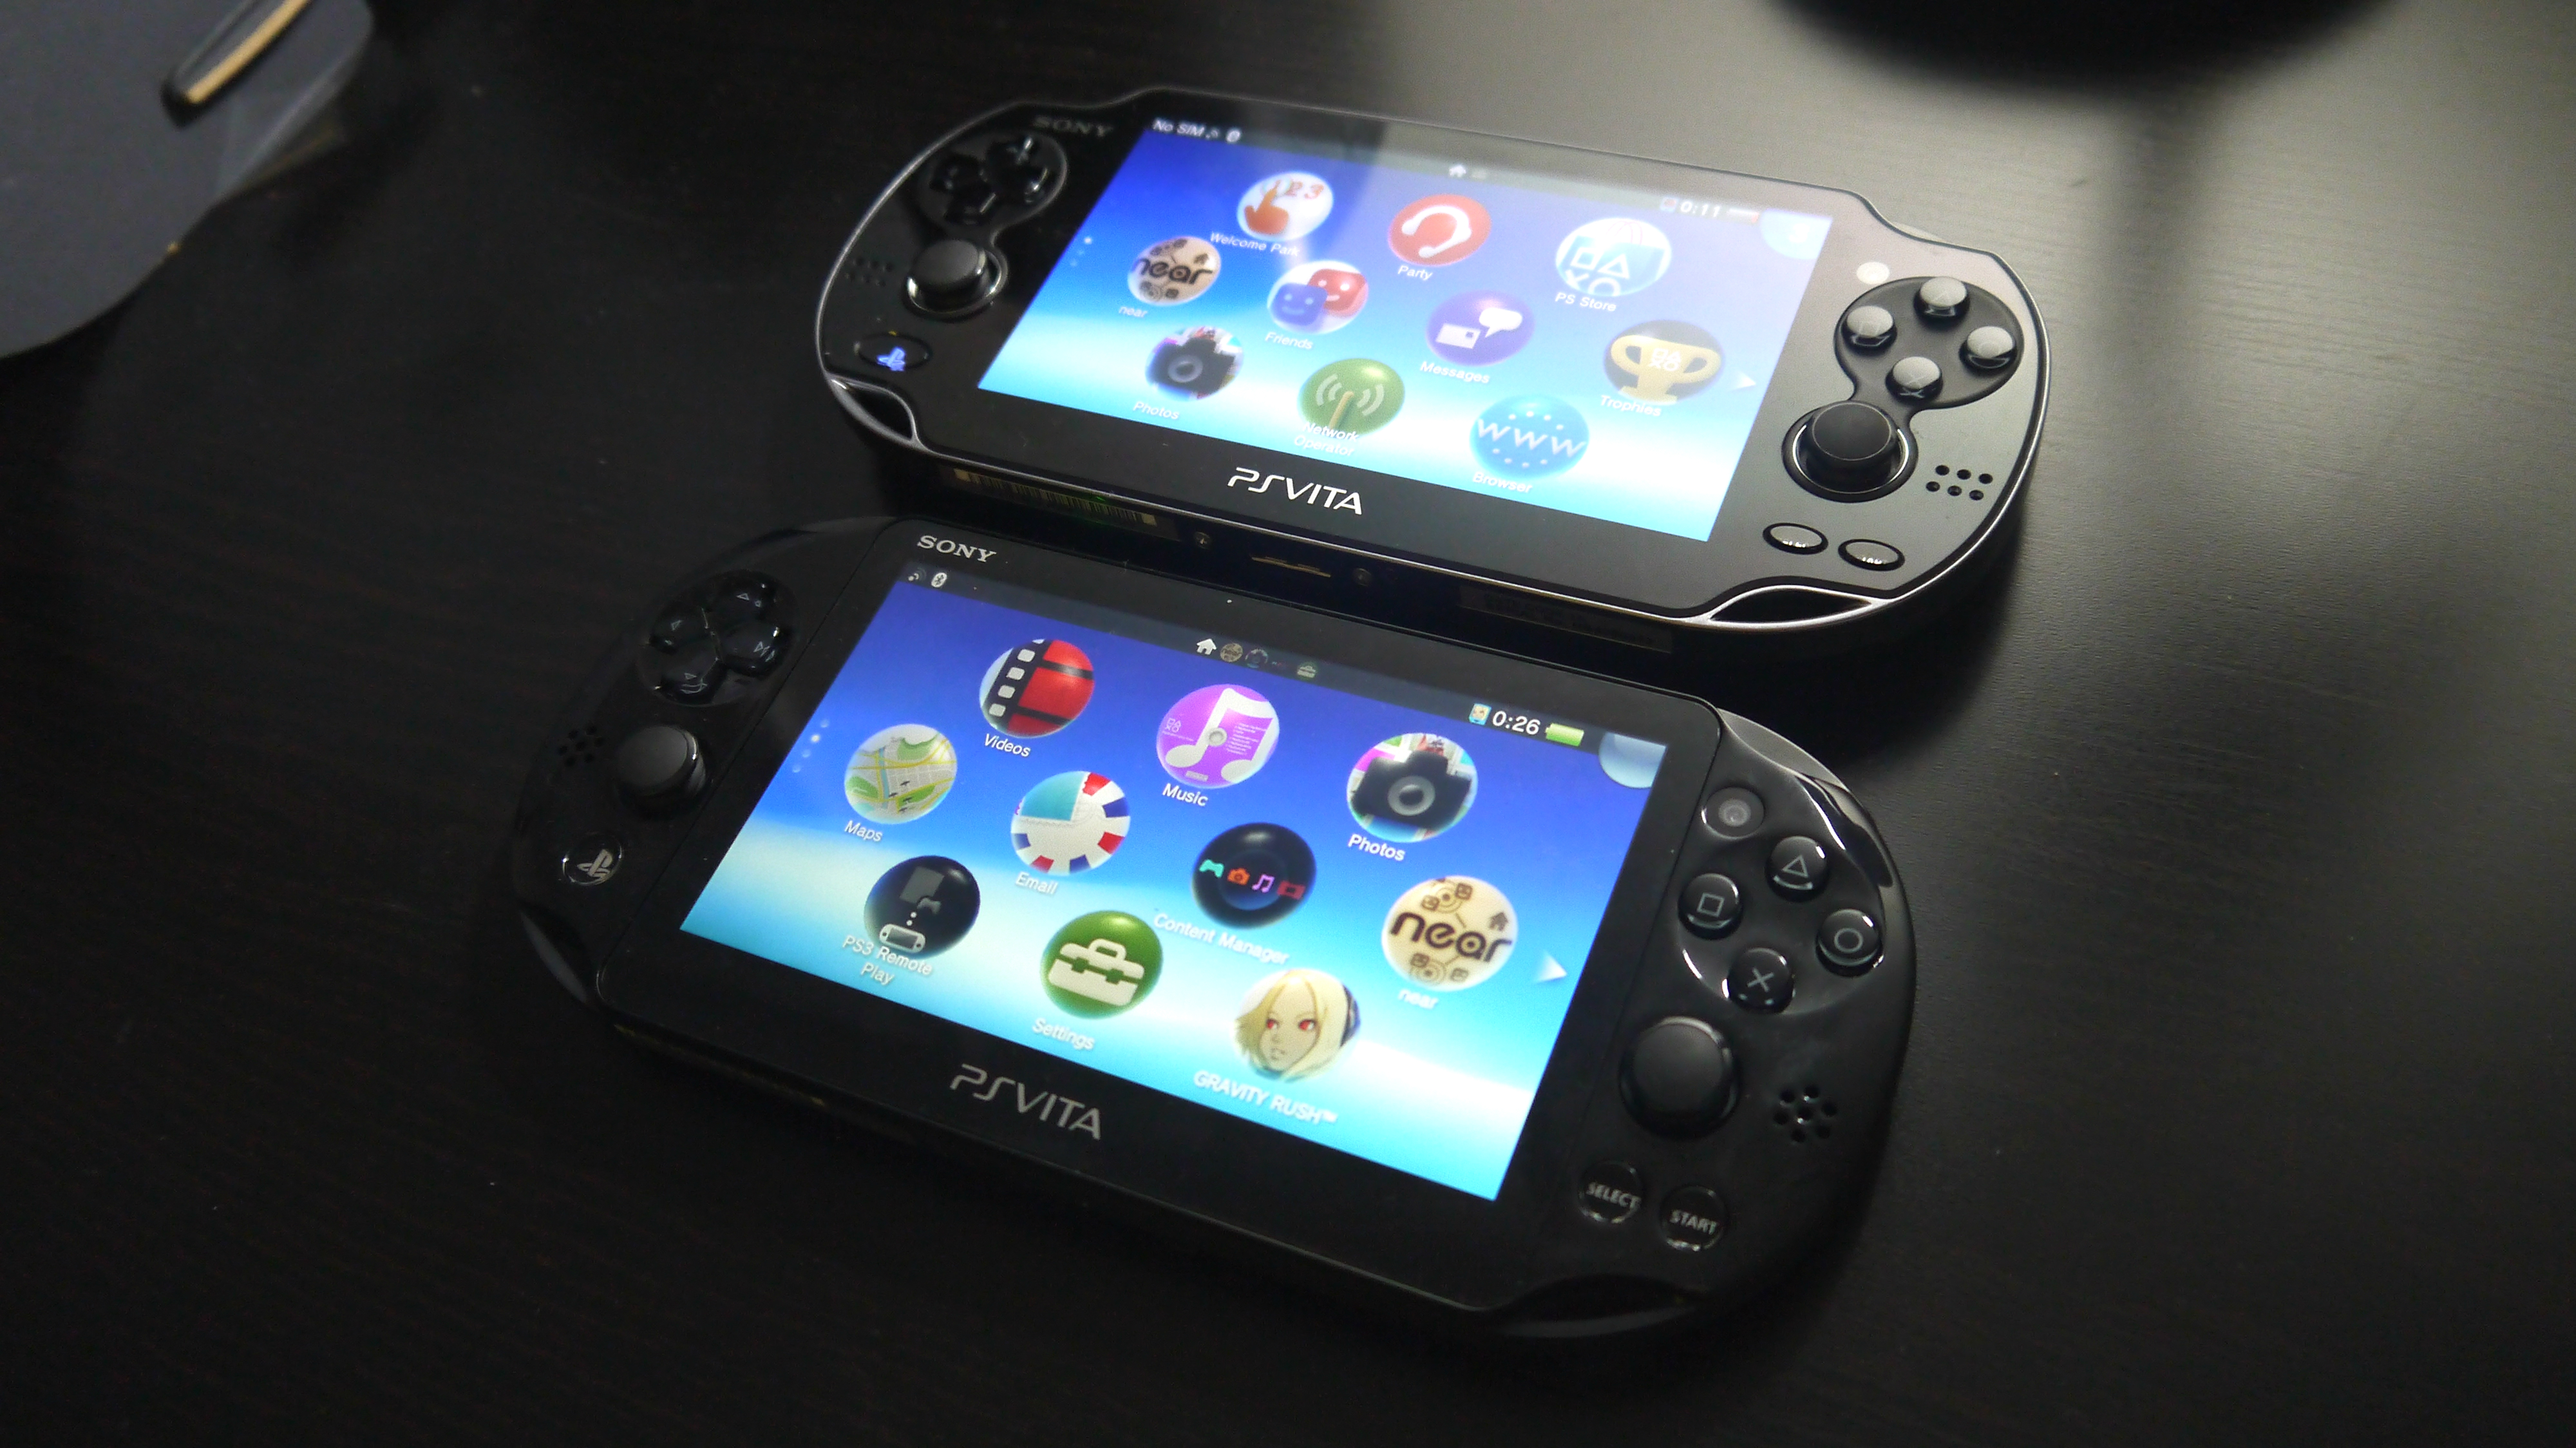 7 best ps vita games: the top titles to grace sony's handheld